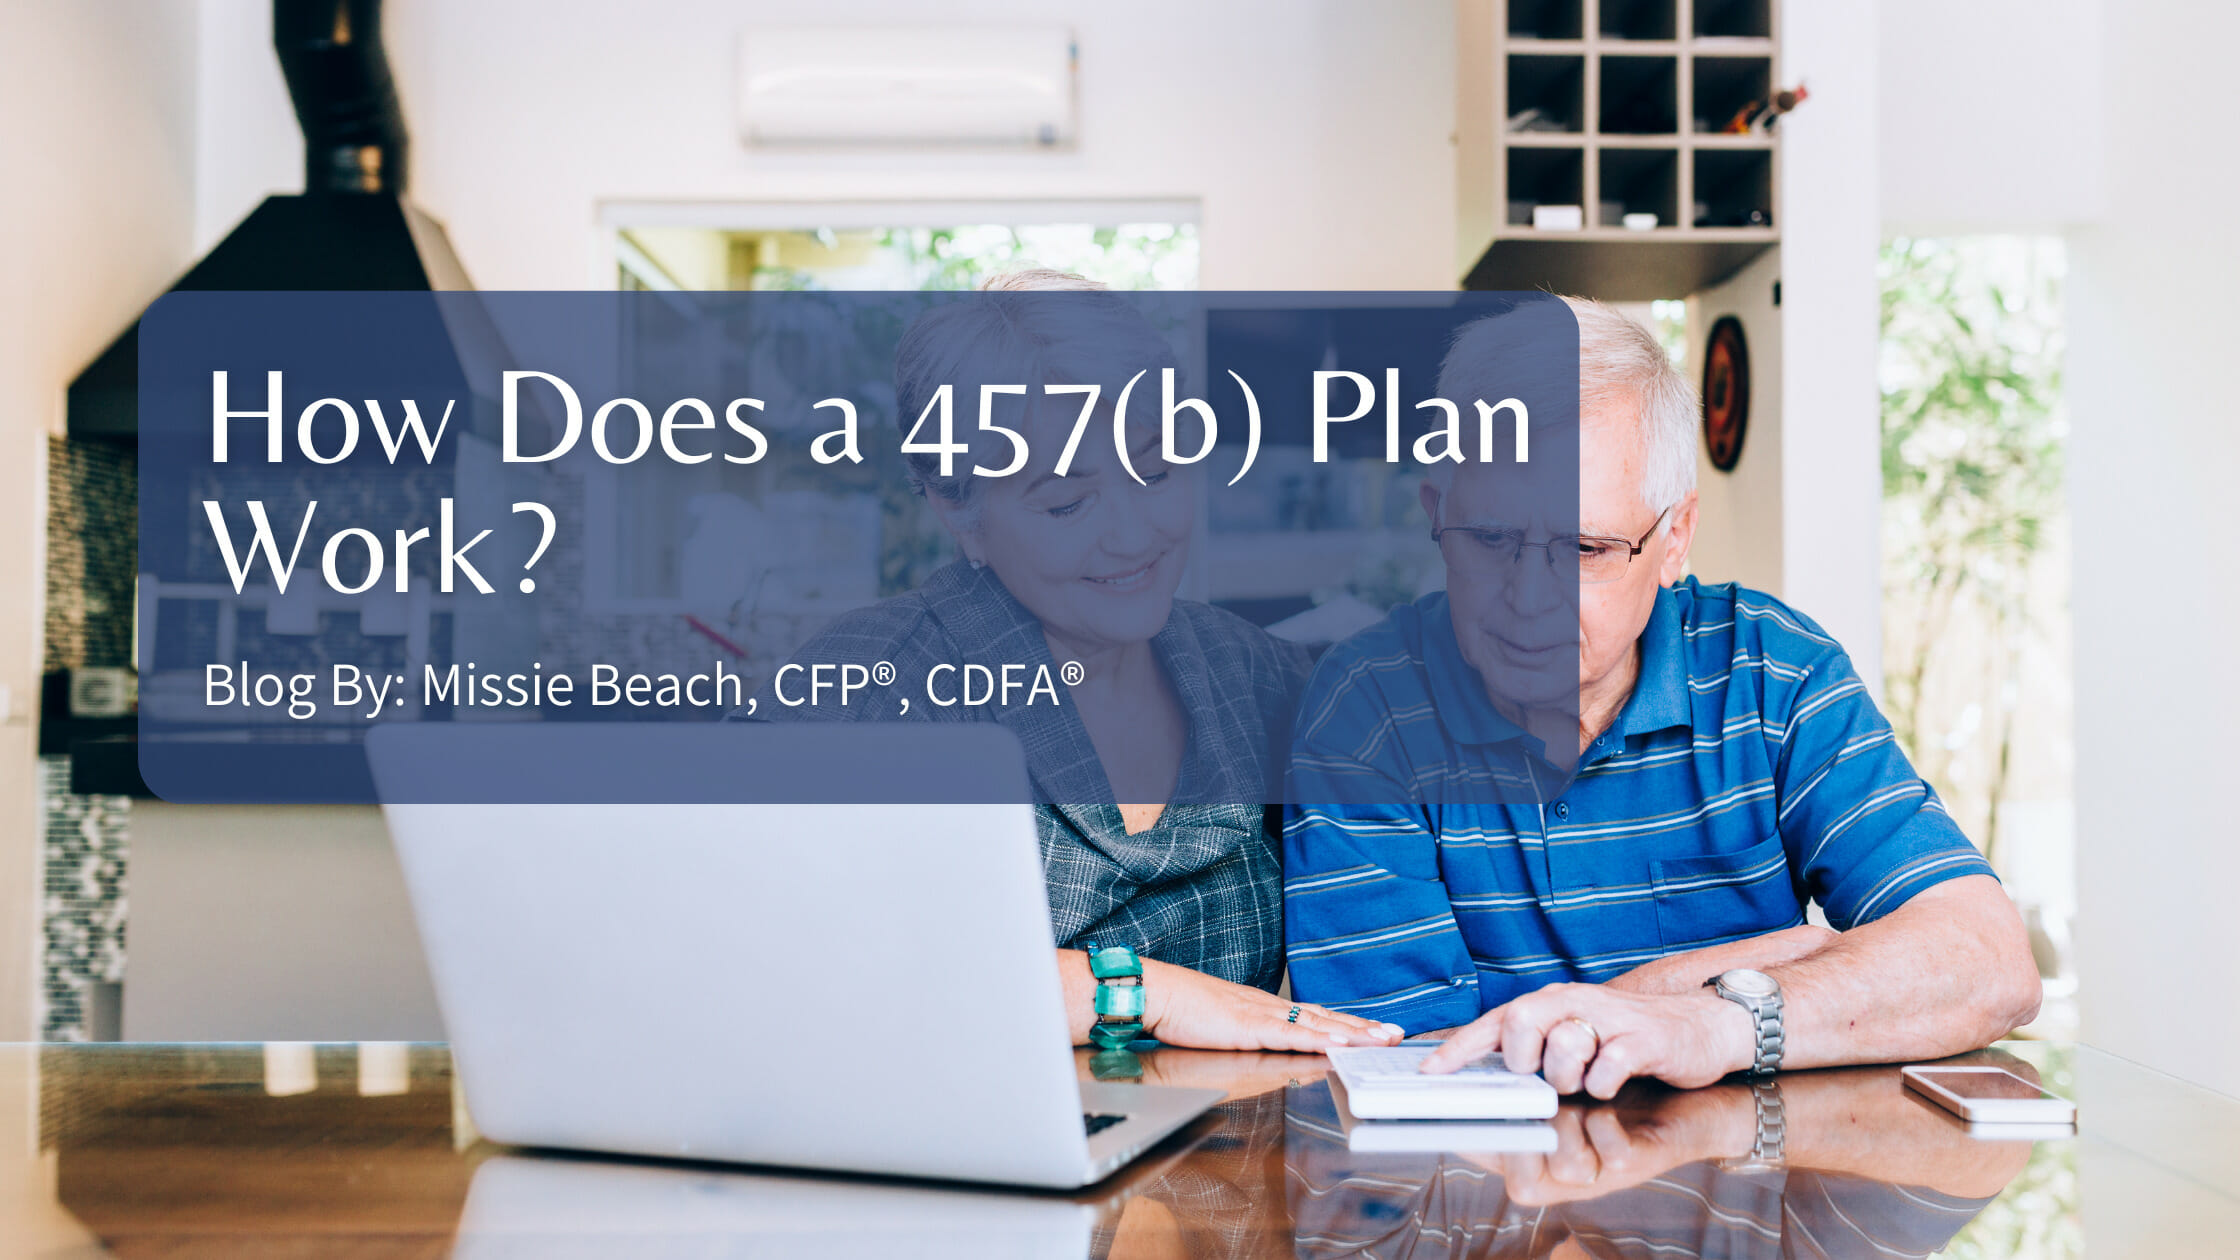 How Does a 457(b) Plan Work?